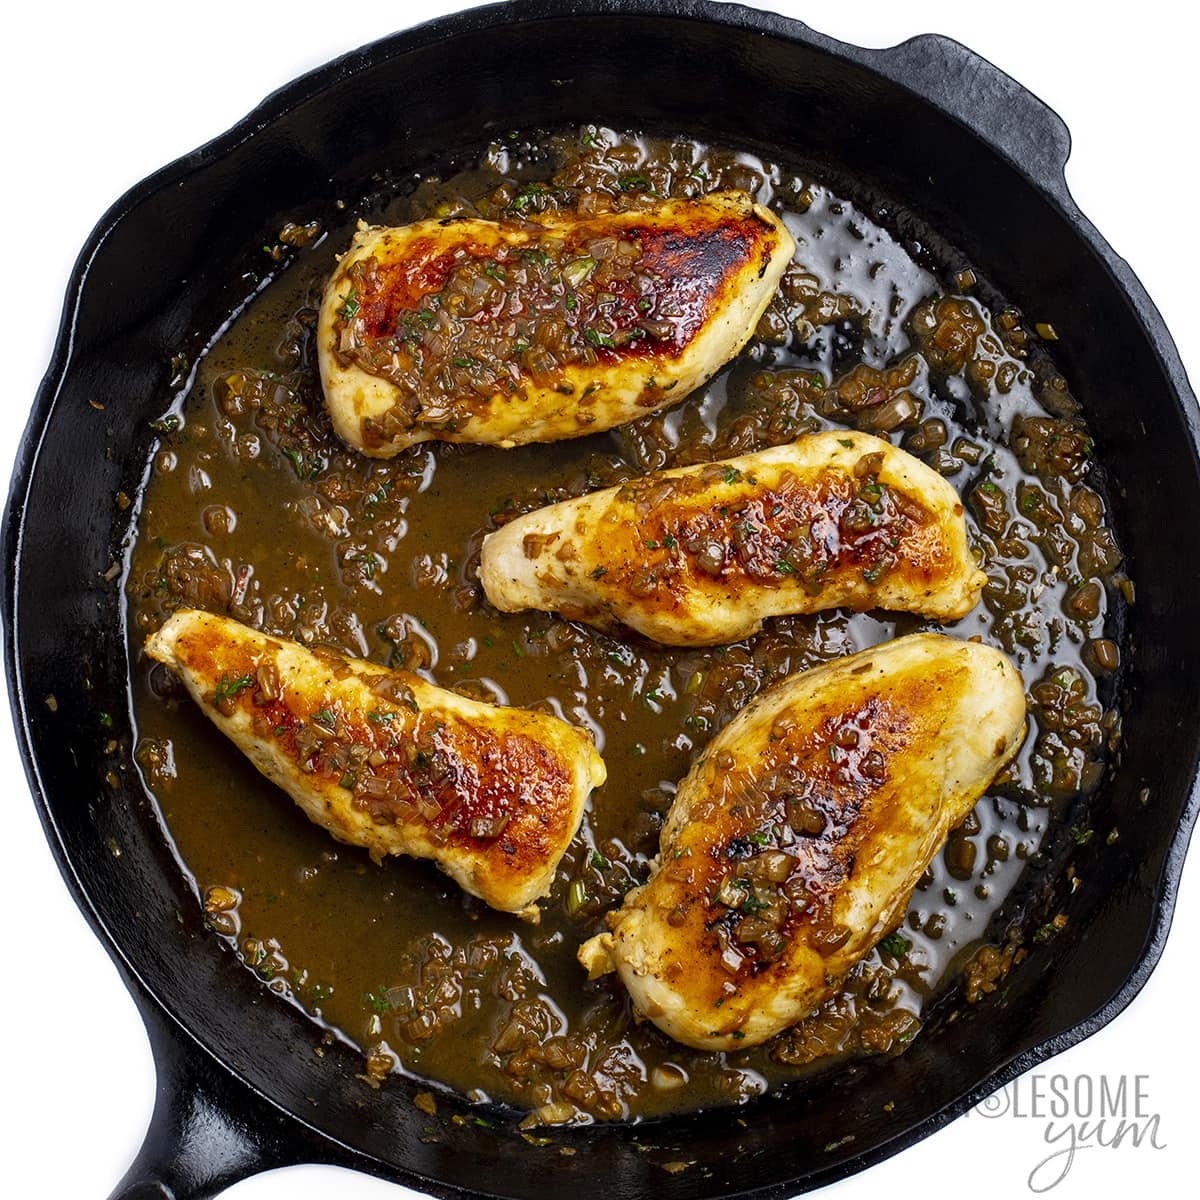 Pan seared chicken breasts added back to the skillet and drizzled with sauce.